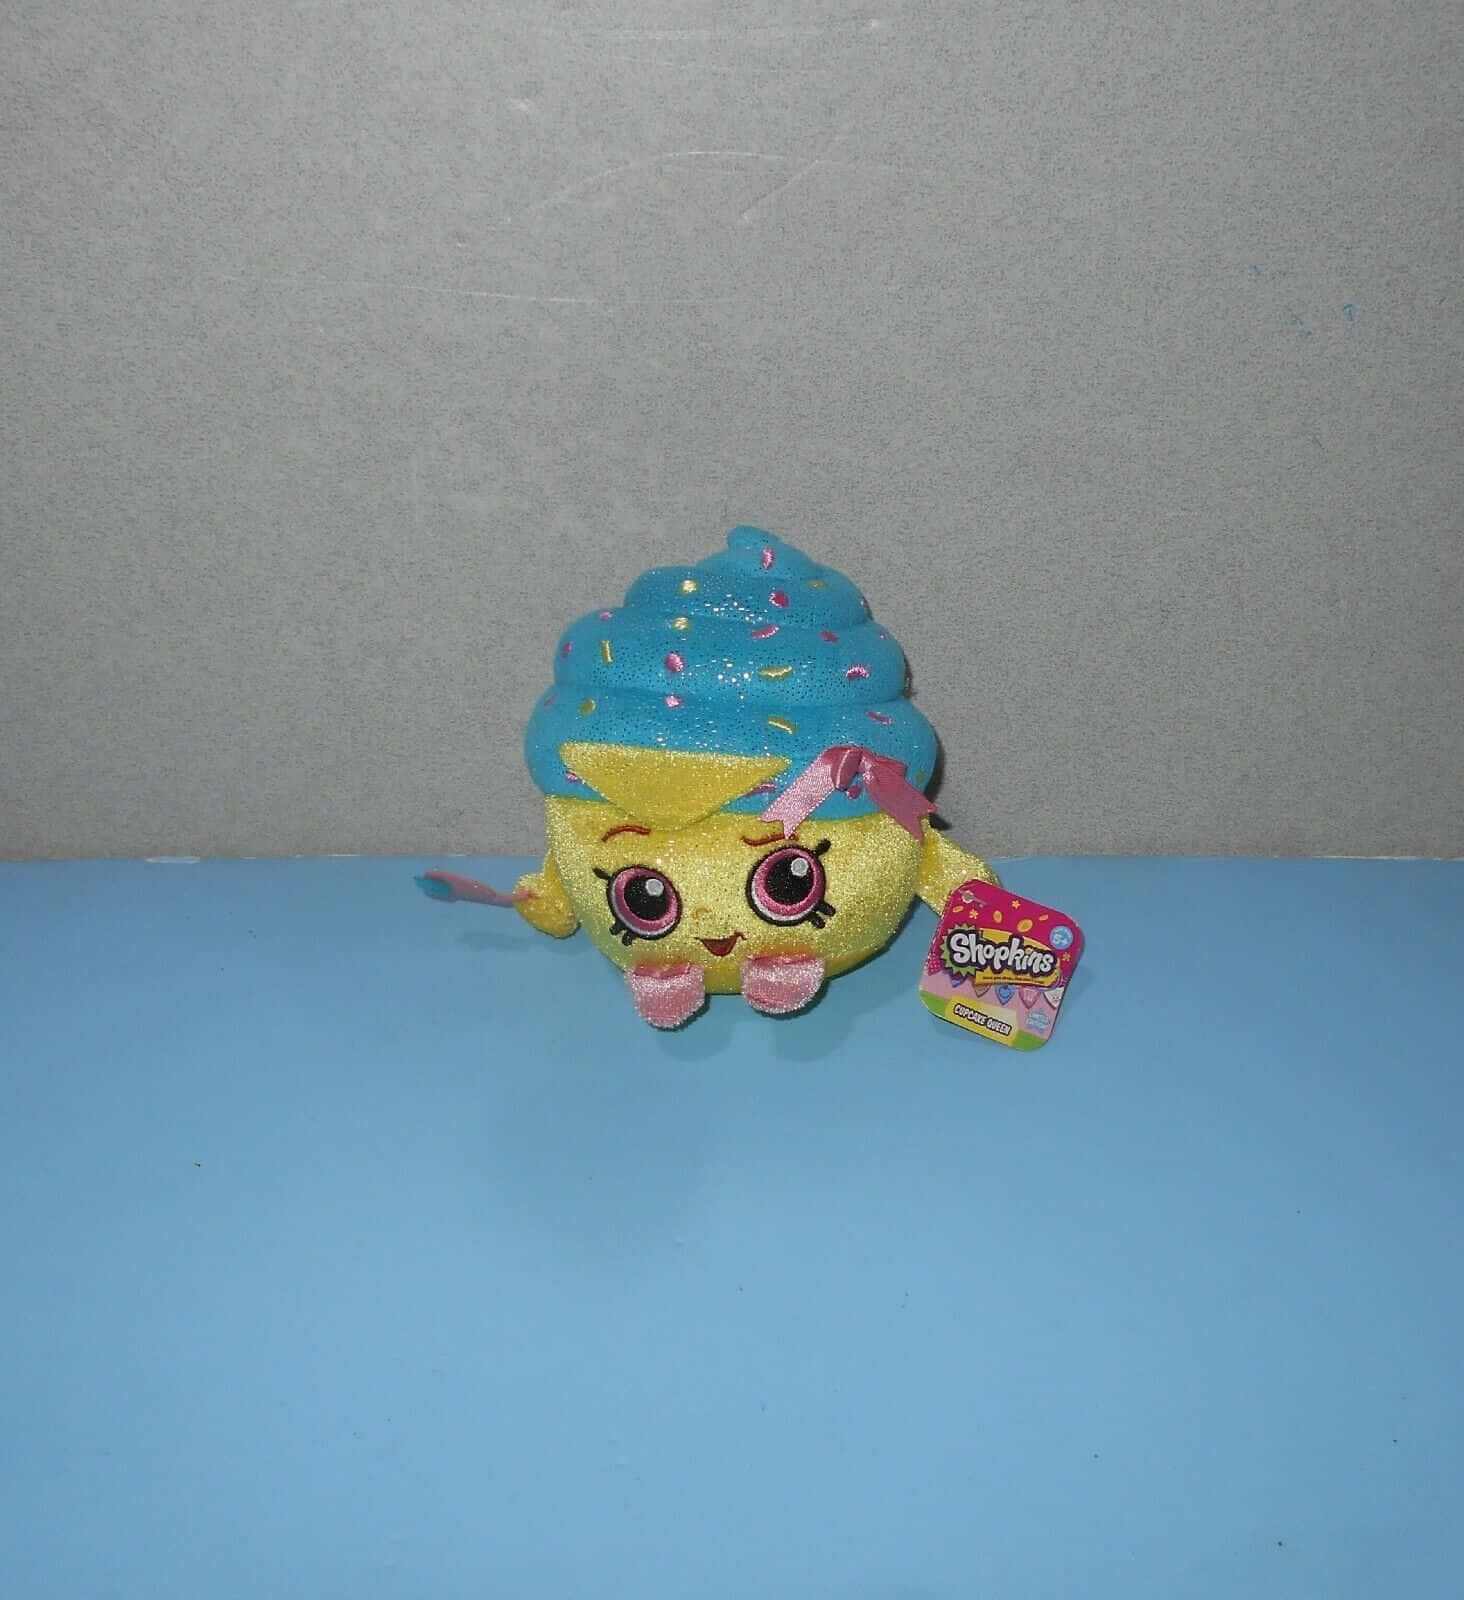 A colorful and adorable collection of Shopkins characters on a pink background